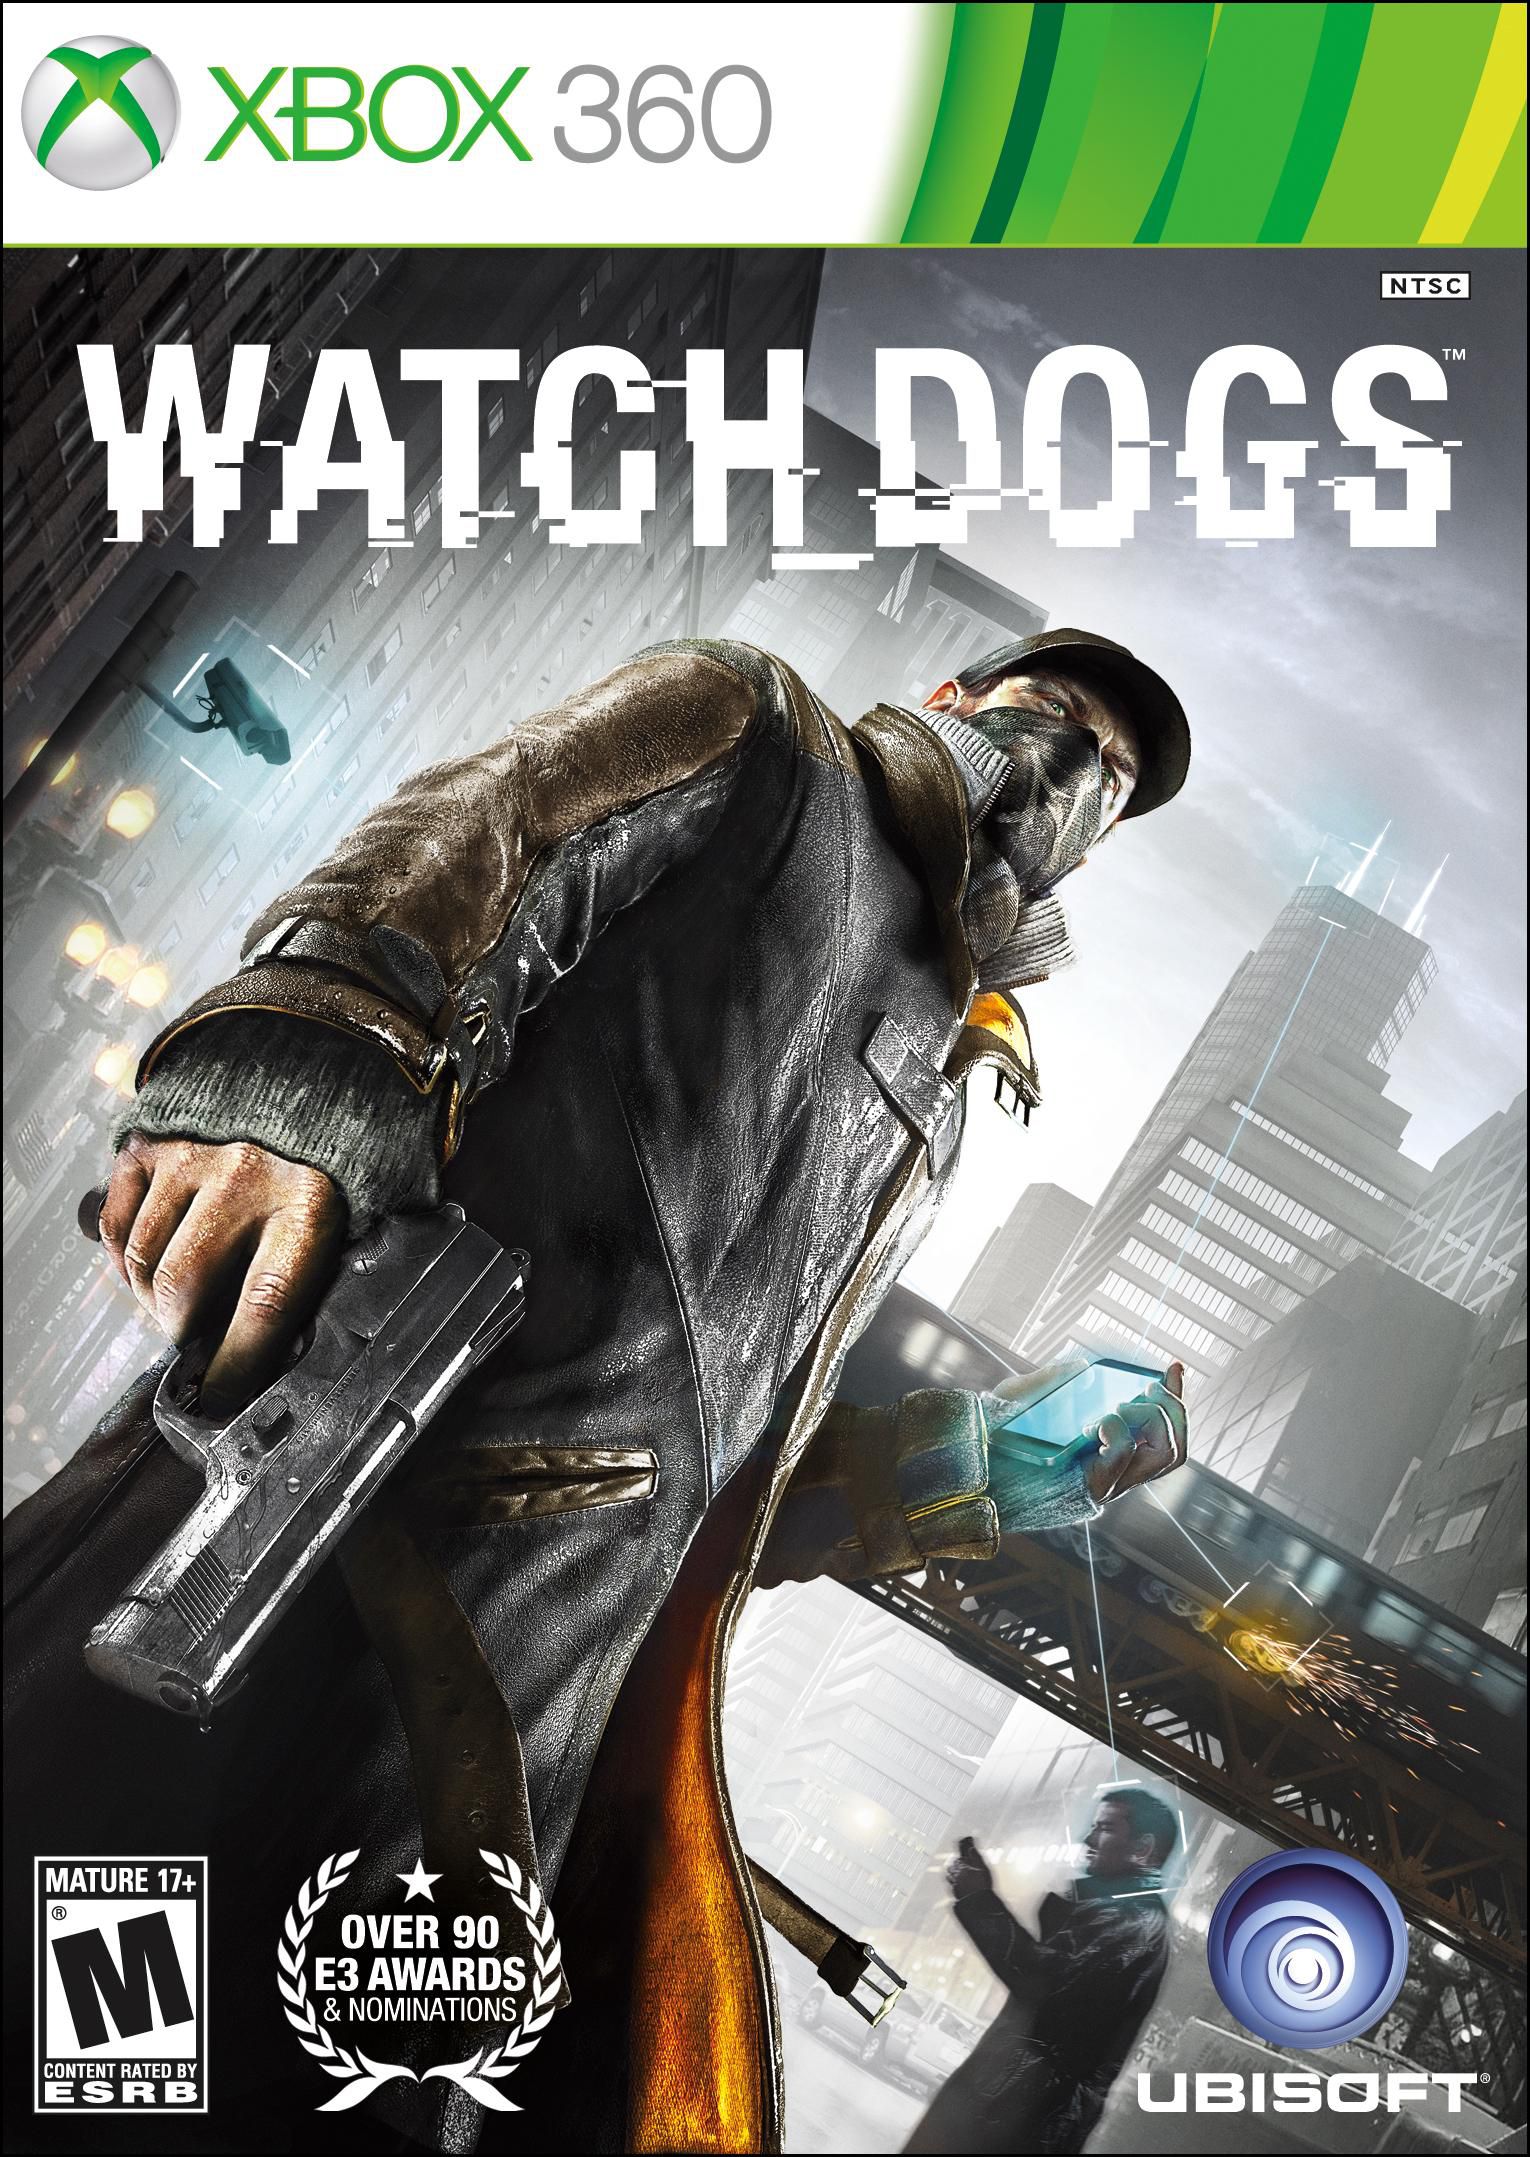 Watch Dogs for Xbox 360